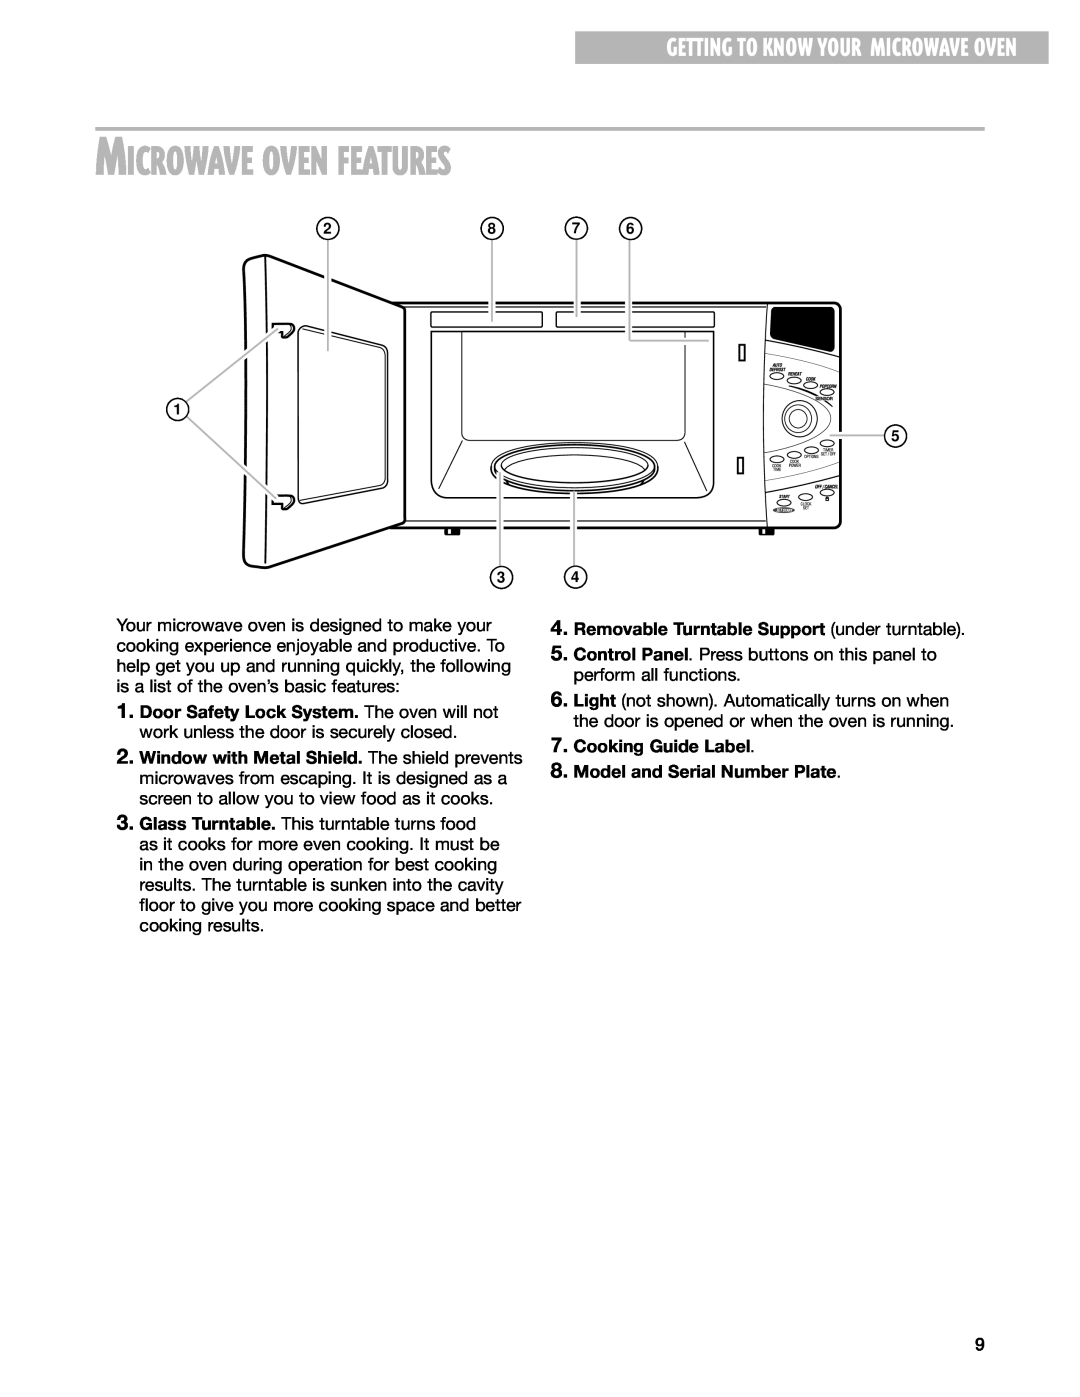 Whirlpool MT3105SH, MT3135SH installation instructions Microwave Oven Features, Getting To Know Your Microwave Oven 